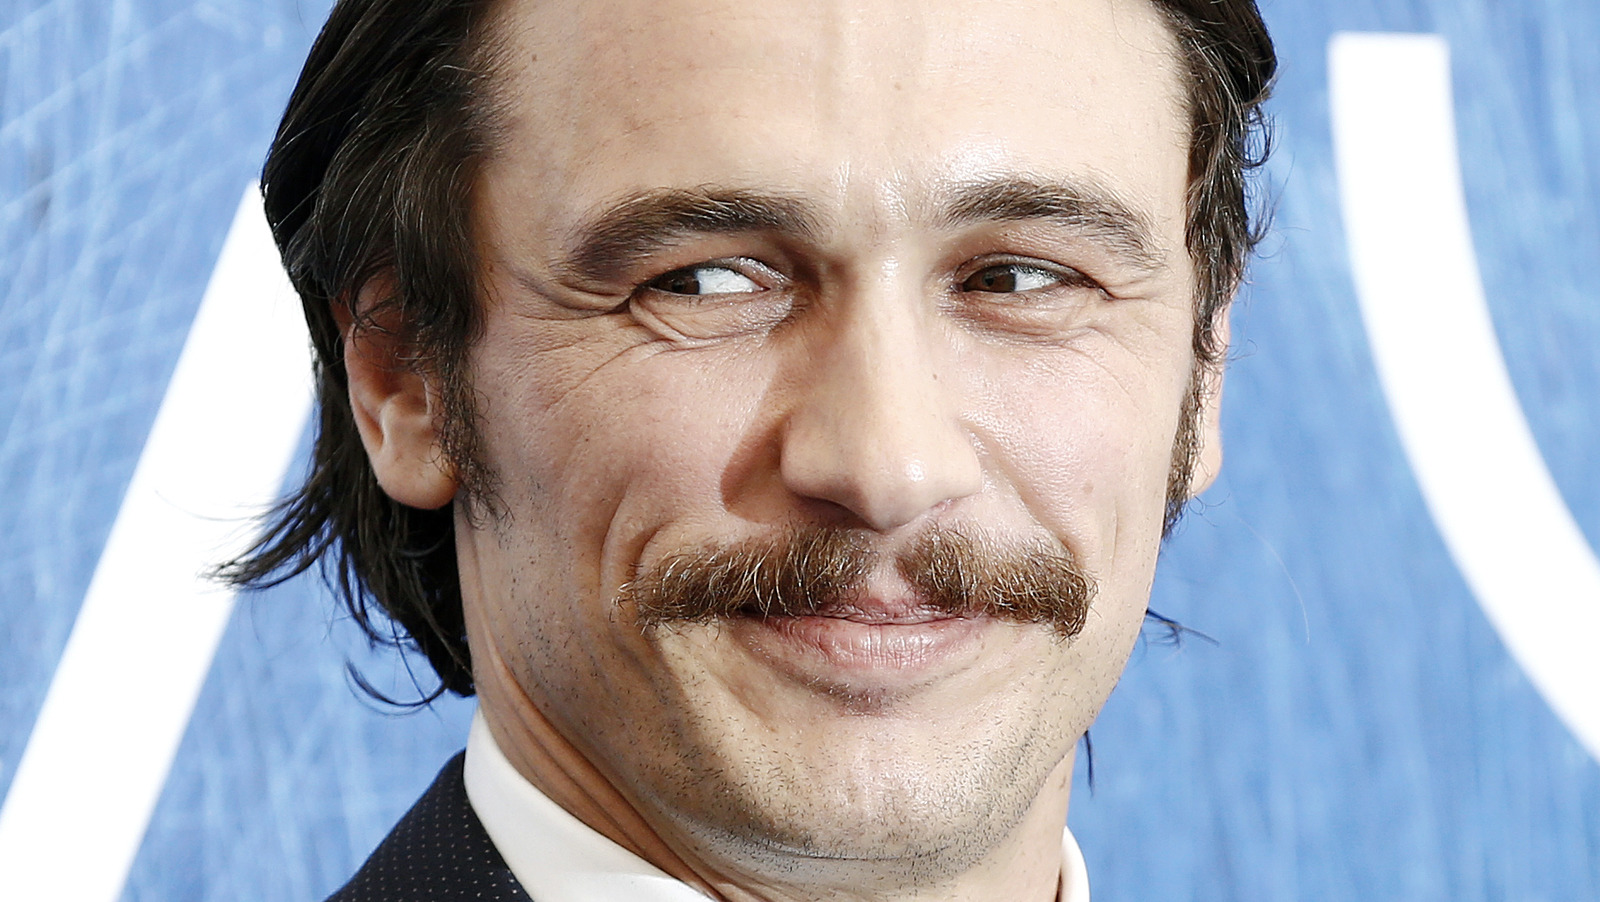 James Franco Already Faces Backlash Over His New Movie Role